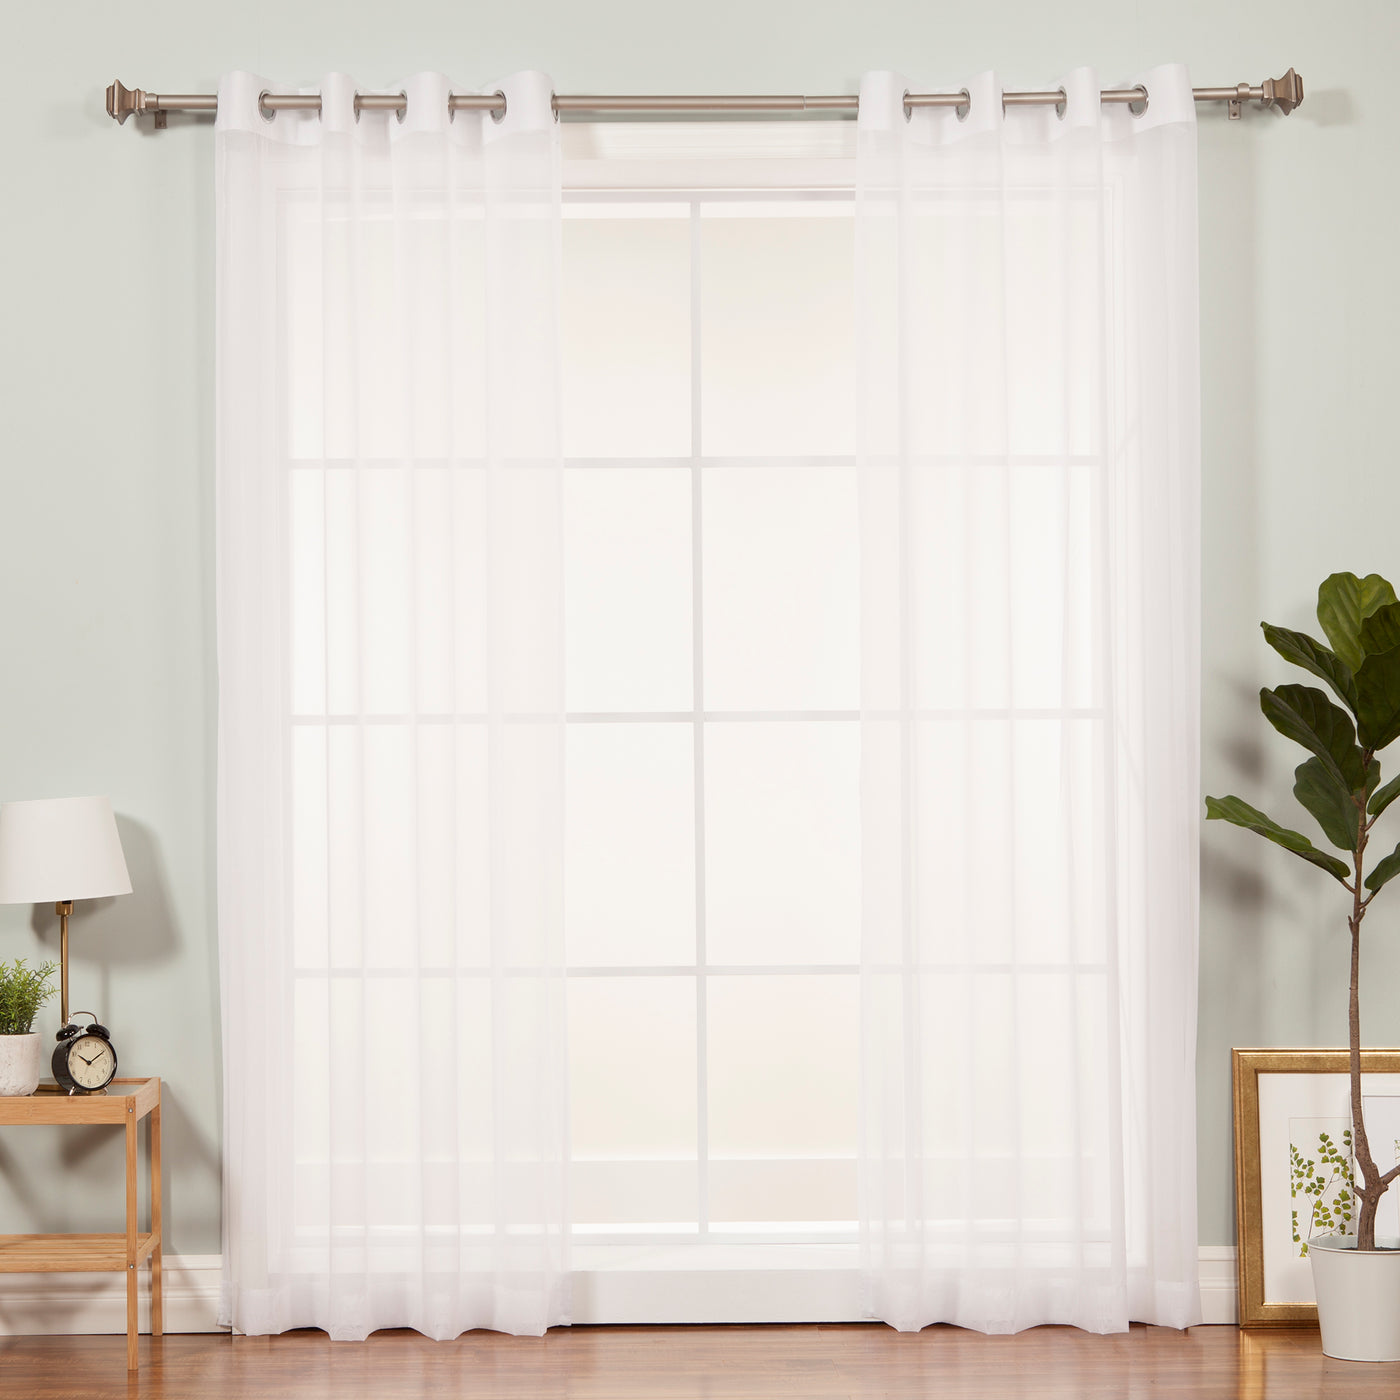 Sheer Voile Silver Grommet Curtains